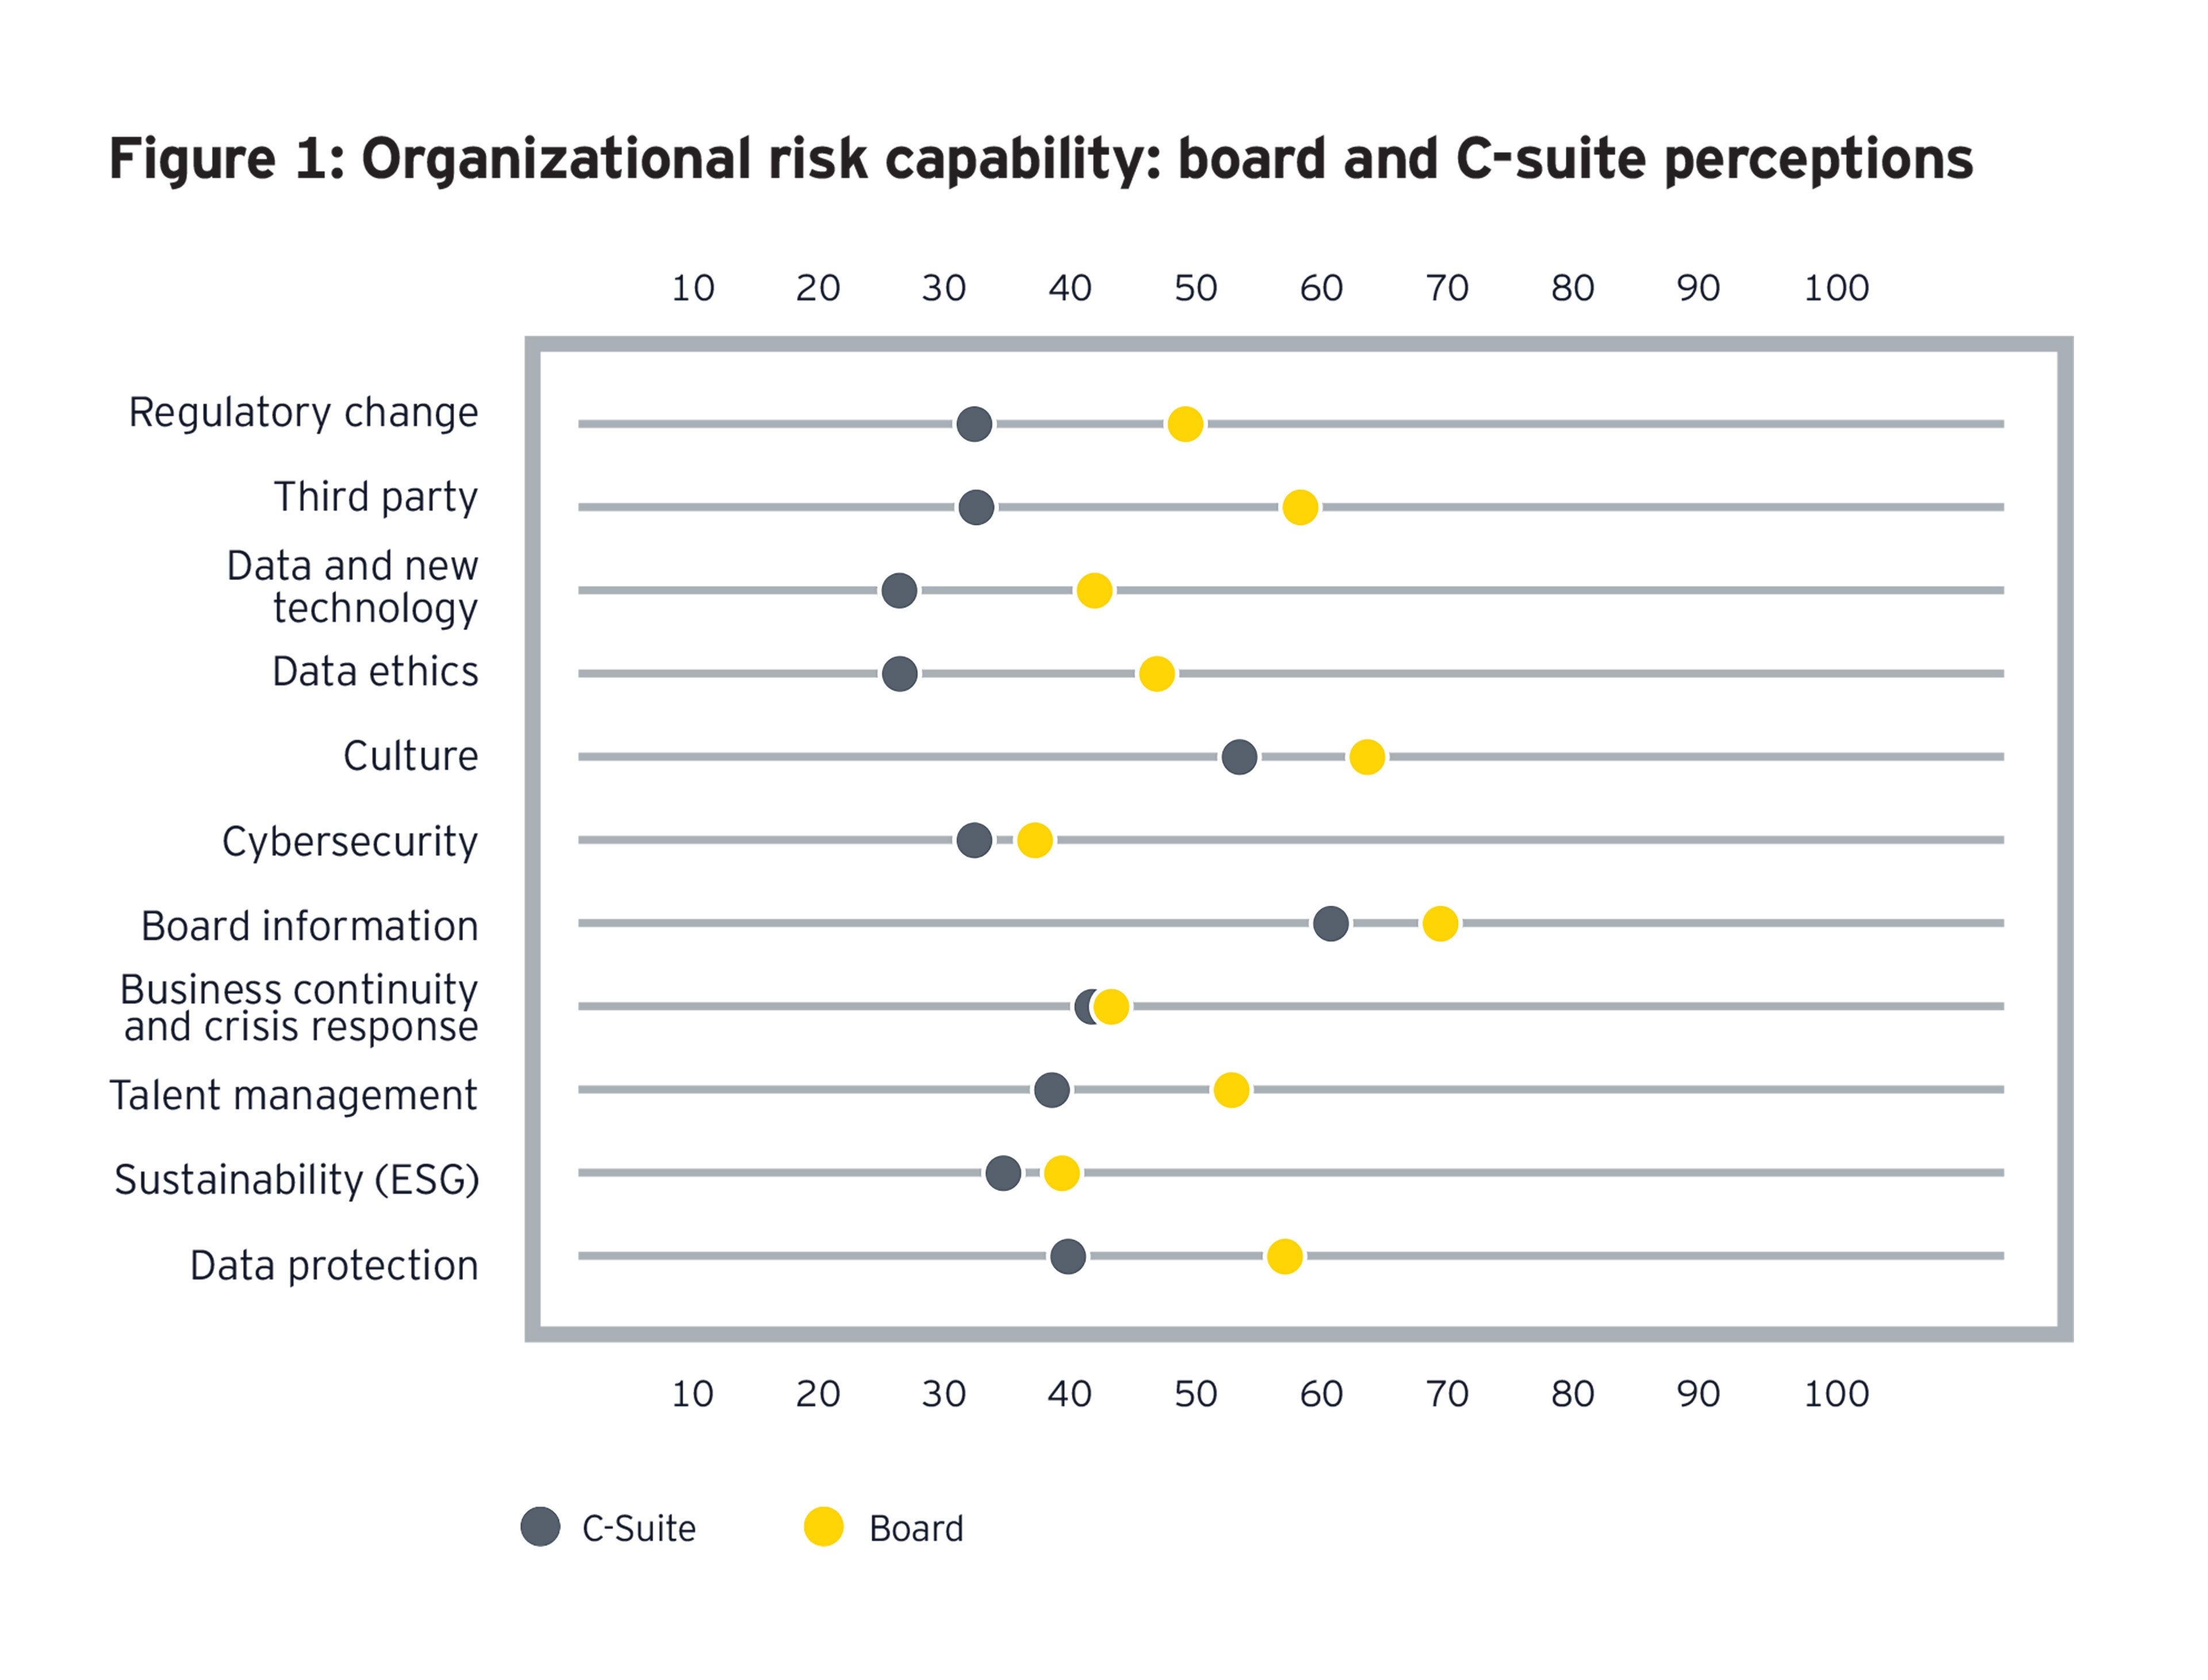 ey-dot-graph-of-organizational-risk-capability-board-and-c-suite-perceptions